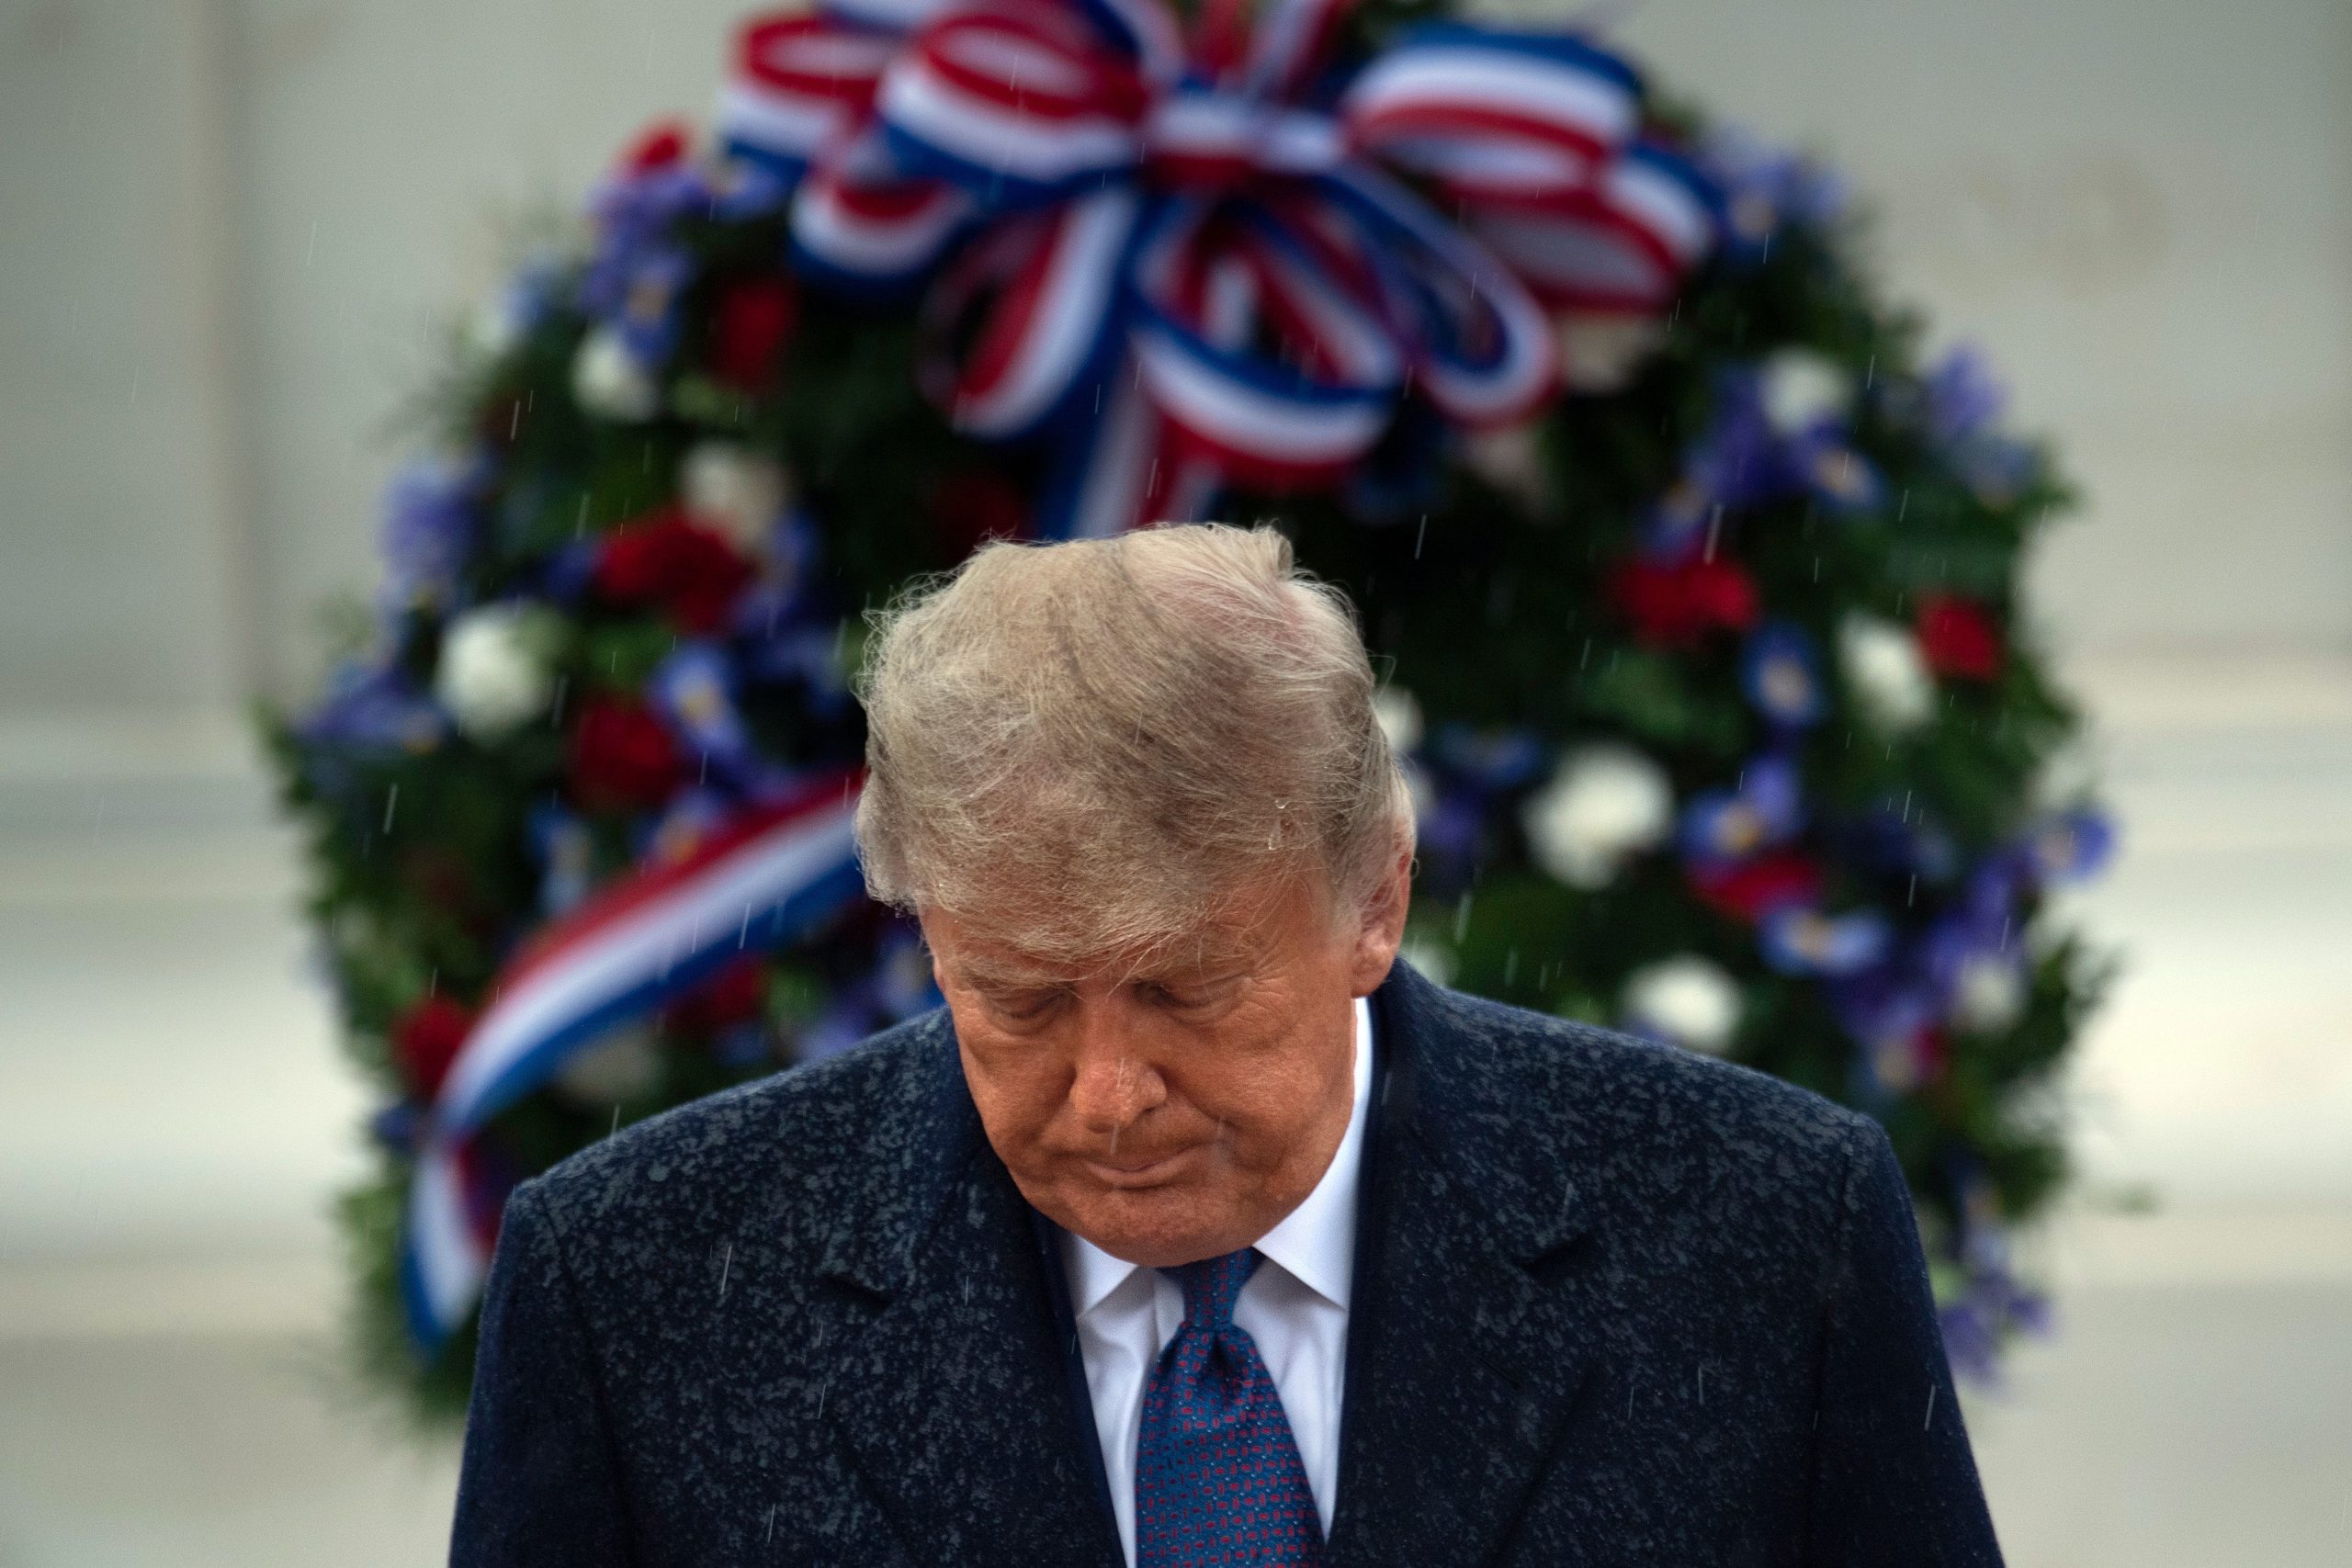 US President Donald Trump leaves after placing a wreath at the Tomb of the Unknown Soldier on Veterans Day at Arlington National Cemetery in Arlington, Virginia, on November 11, 2020. - US President Donald Trump made his first official post-election appearance Wednesday for what should be a moment of national unity to mark Veteran's Day, now marred by his refusal to acknowledge Joe Biden's win. The president visited Arlington National Cemetery, four days after US media projected his Democratic rival would take the White House. (Photo by BRENDAN SMIALOWSKI/AFP via Getty Images)